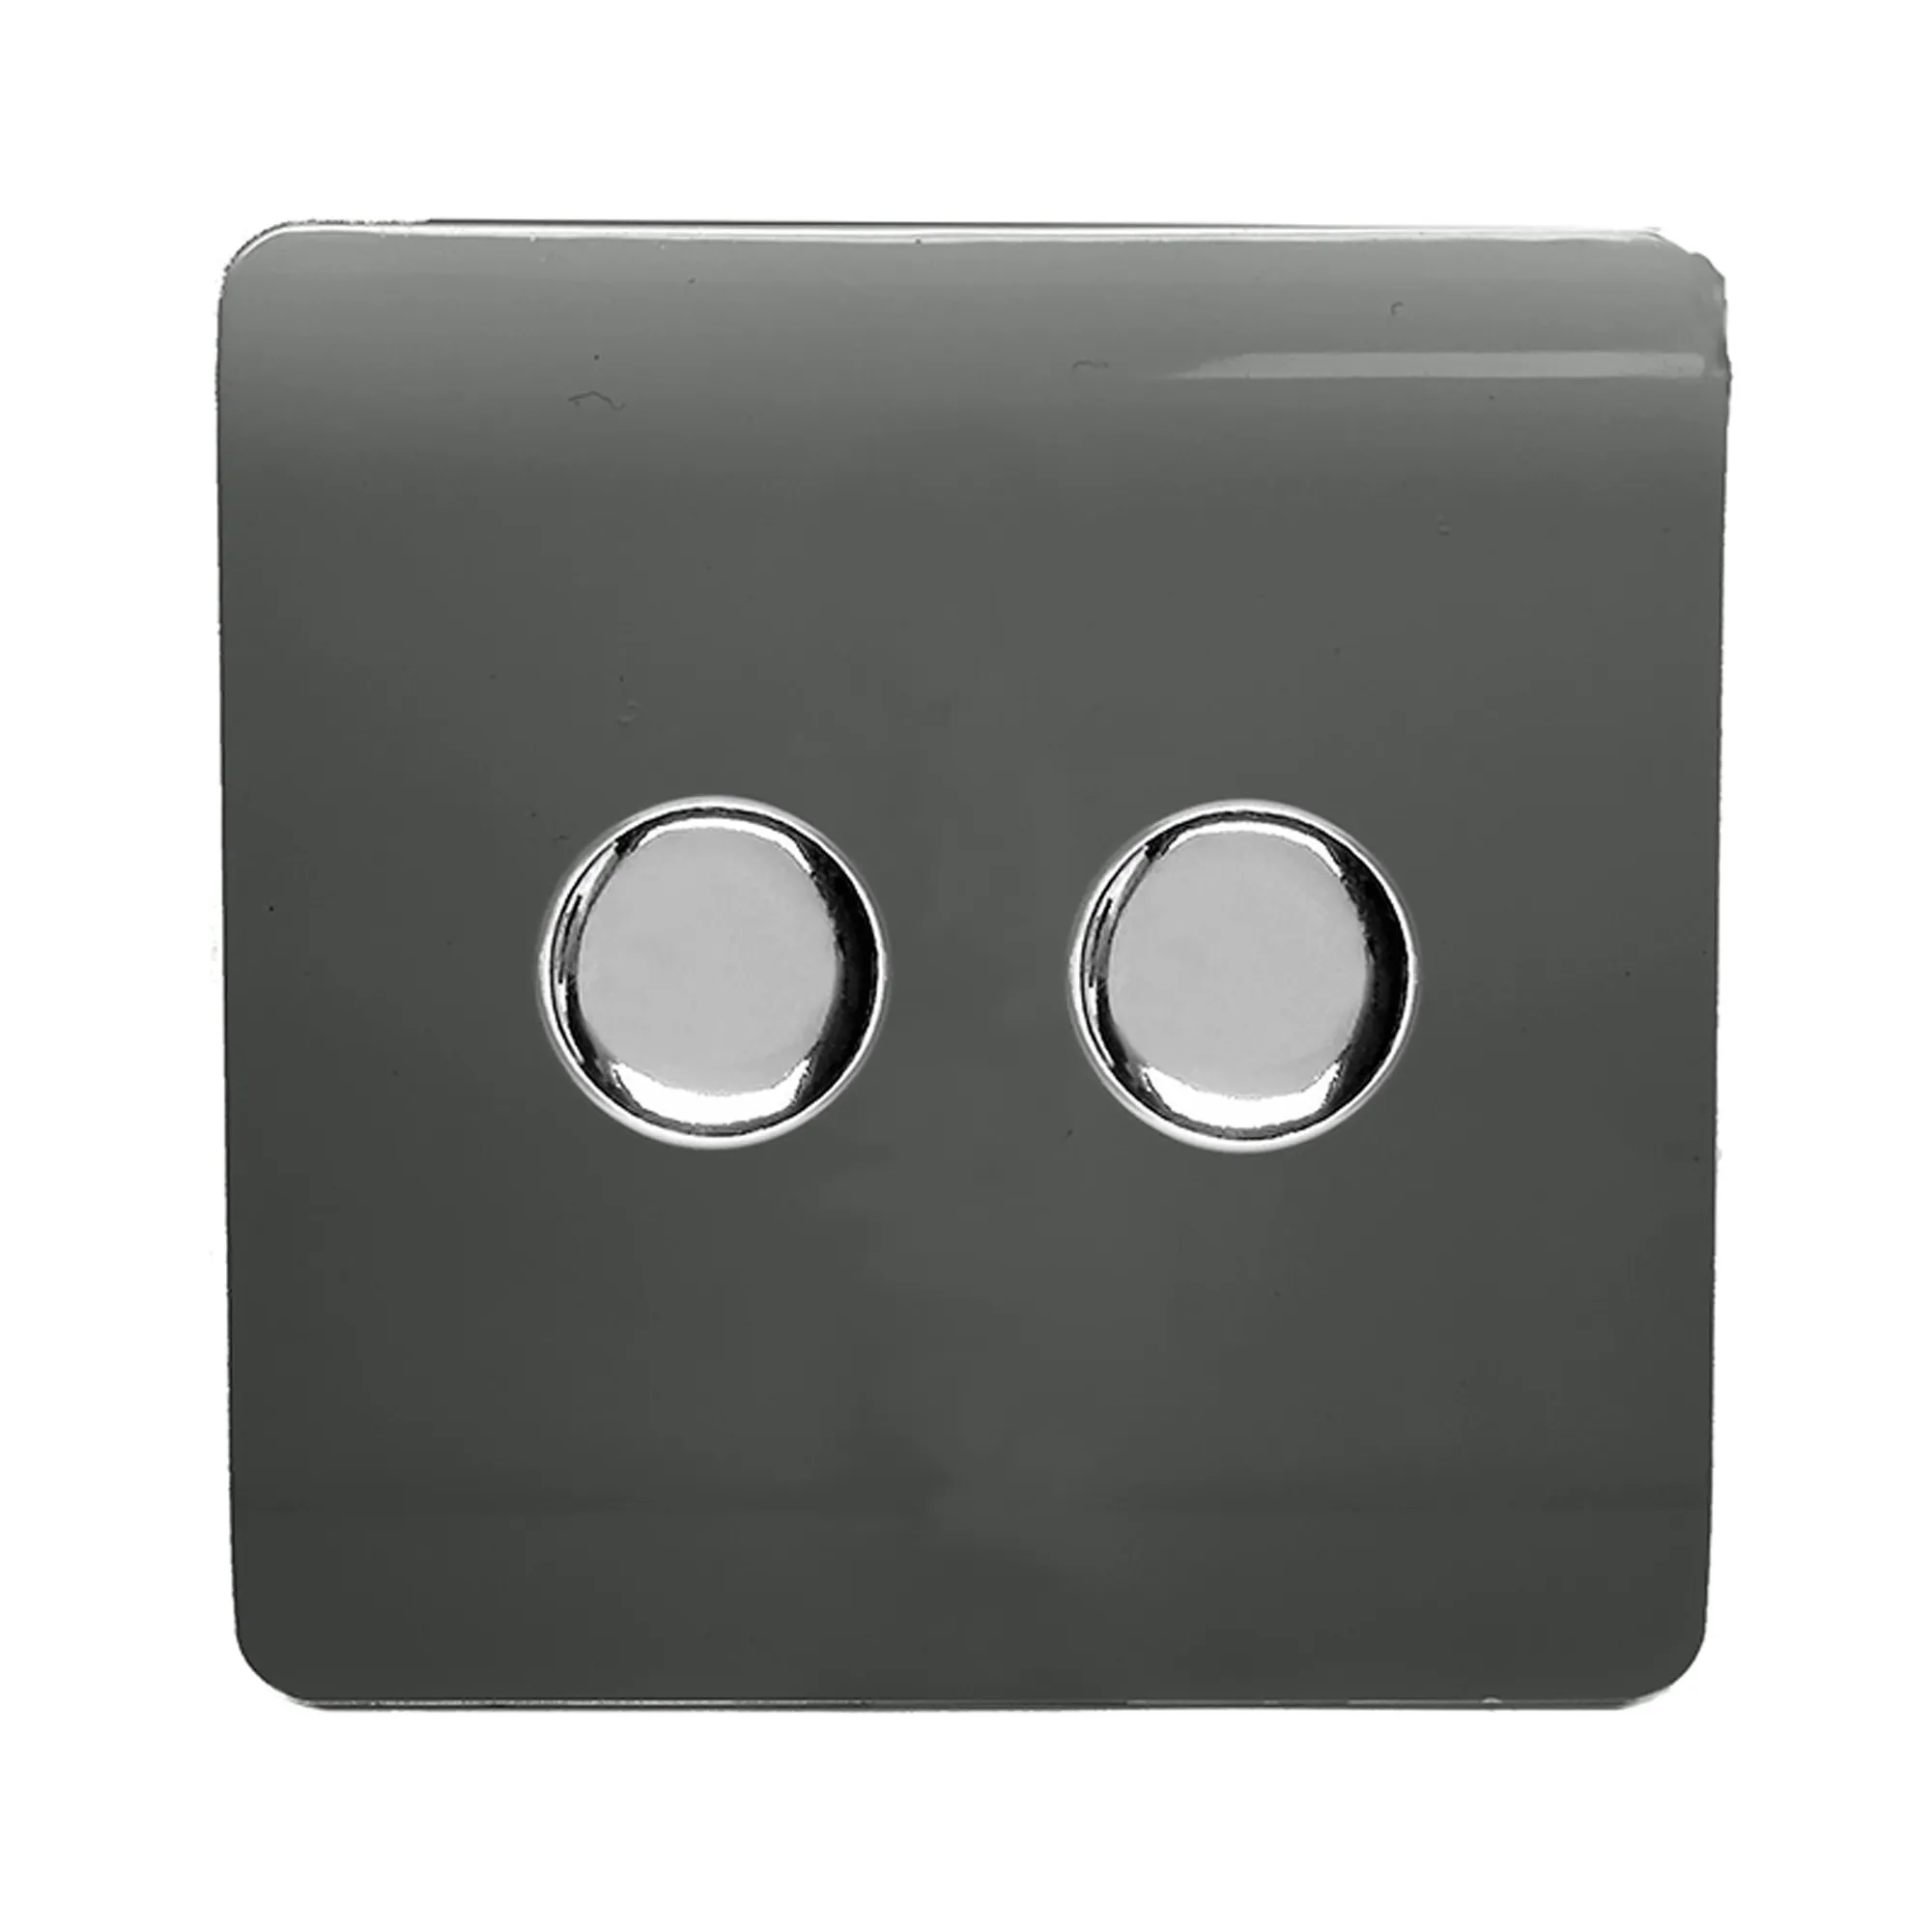 ART-2LDMCH  2 Gang 2 Way LED Dimmer Switch Charcoal